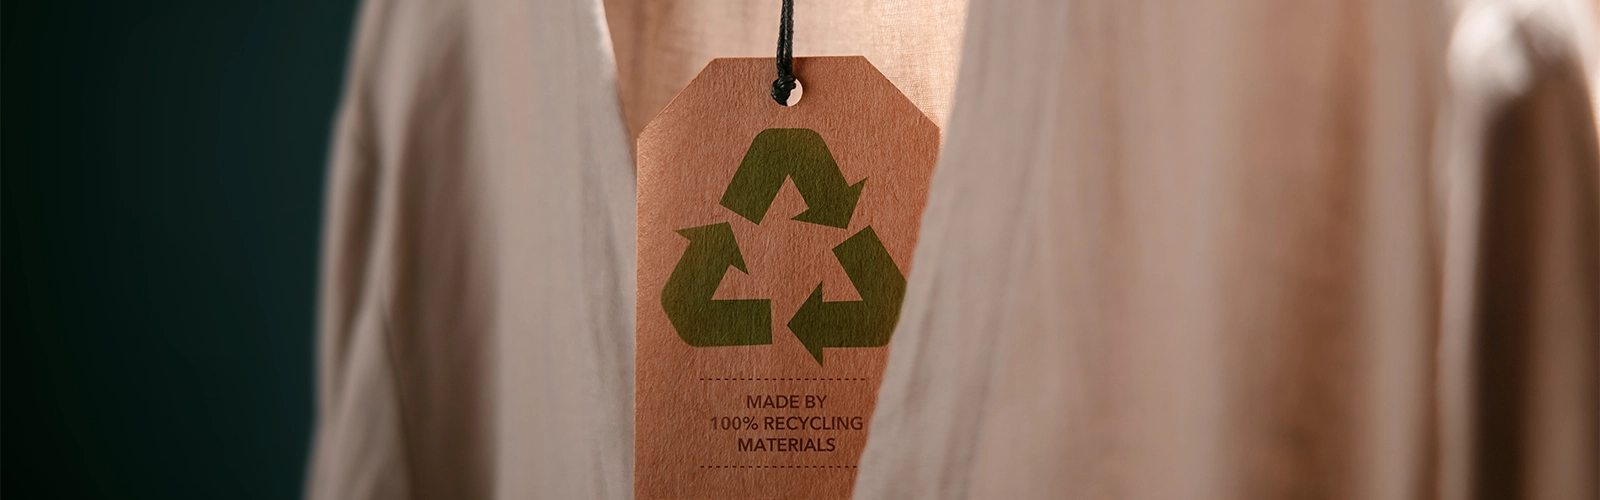 Fashion Industry: Trends Centering on Sustainability